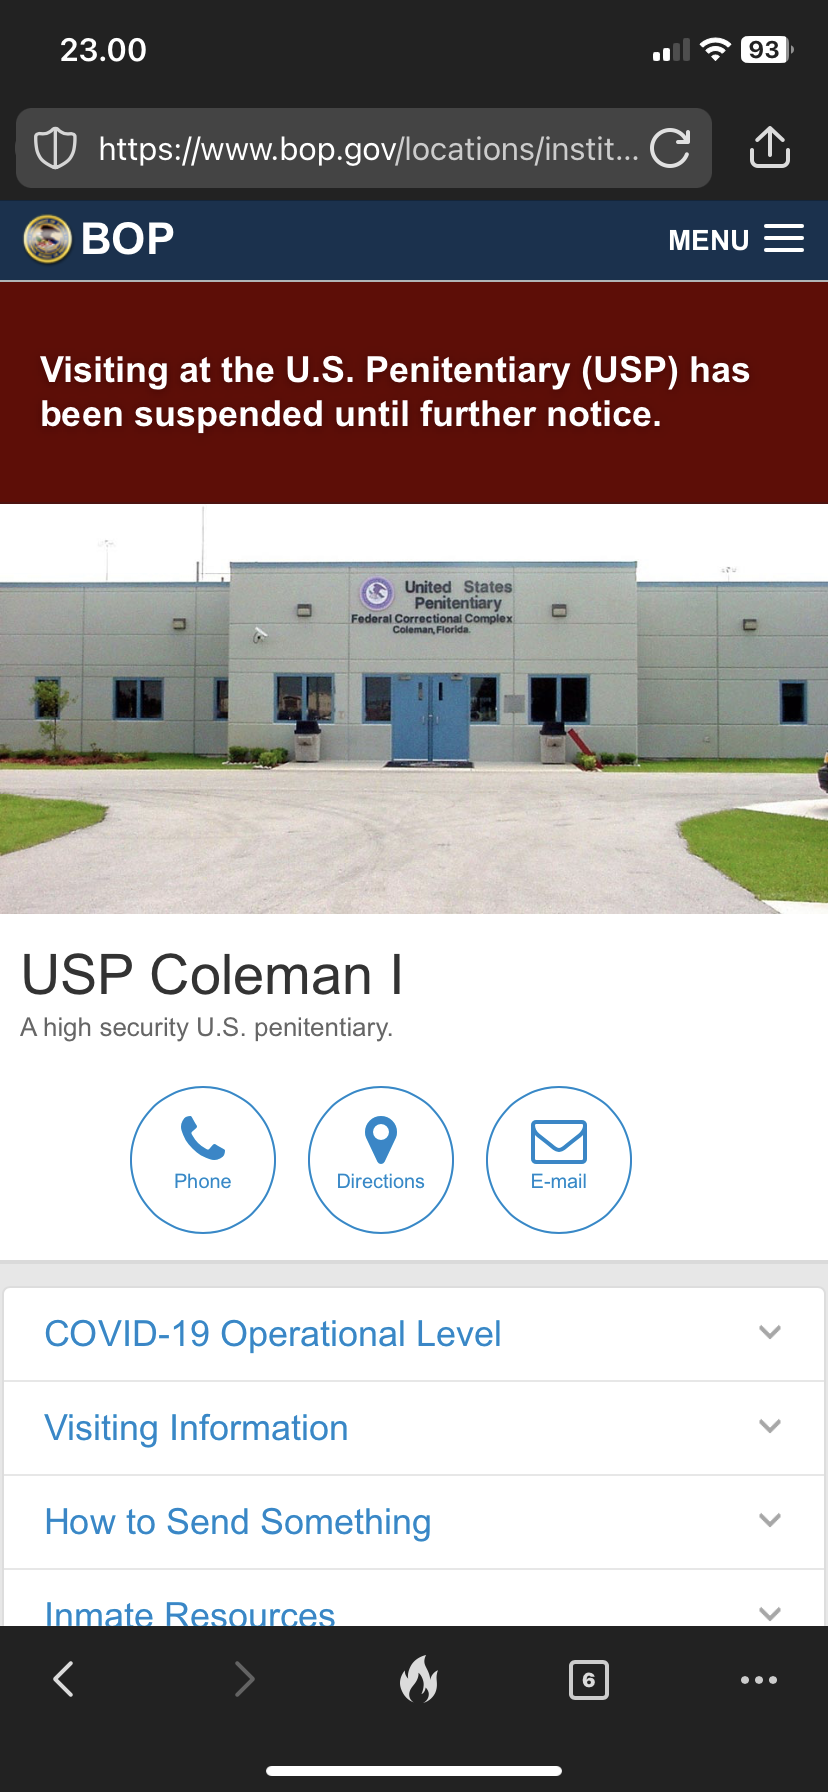 A screenshot taken on September 18, 2023, of the Bureau of Prisons’ page on USP Coleman I indicates, “Visiting at the U.S. Penitentiary (USP) has been suspended until further notice.”